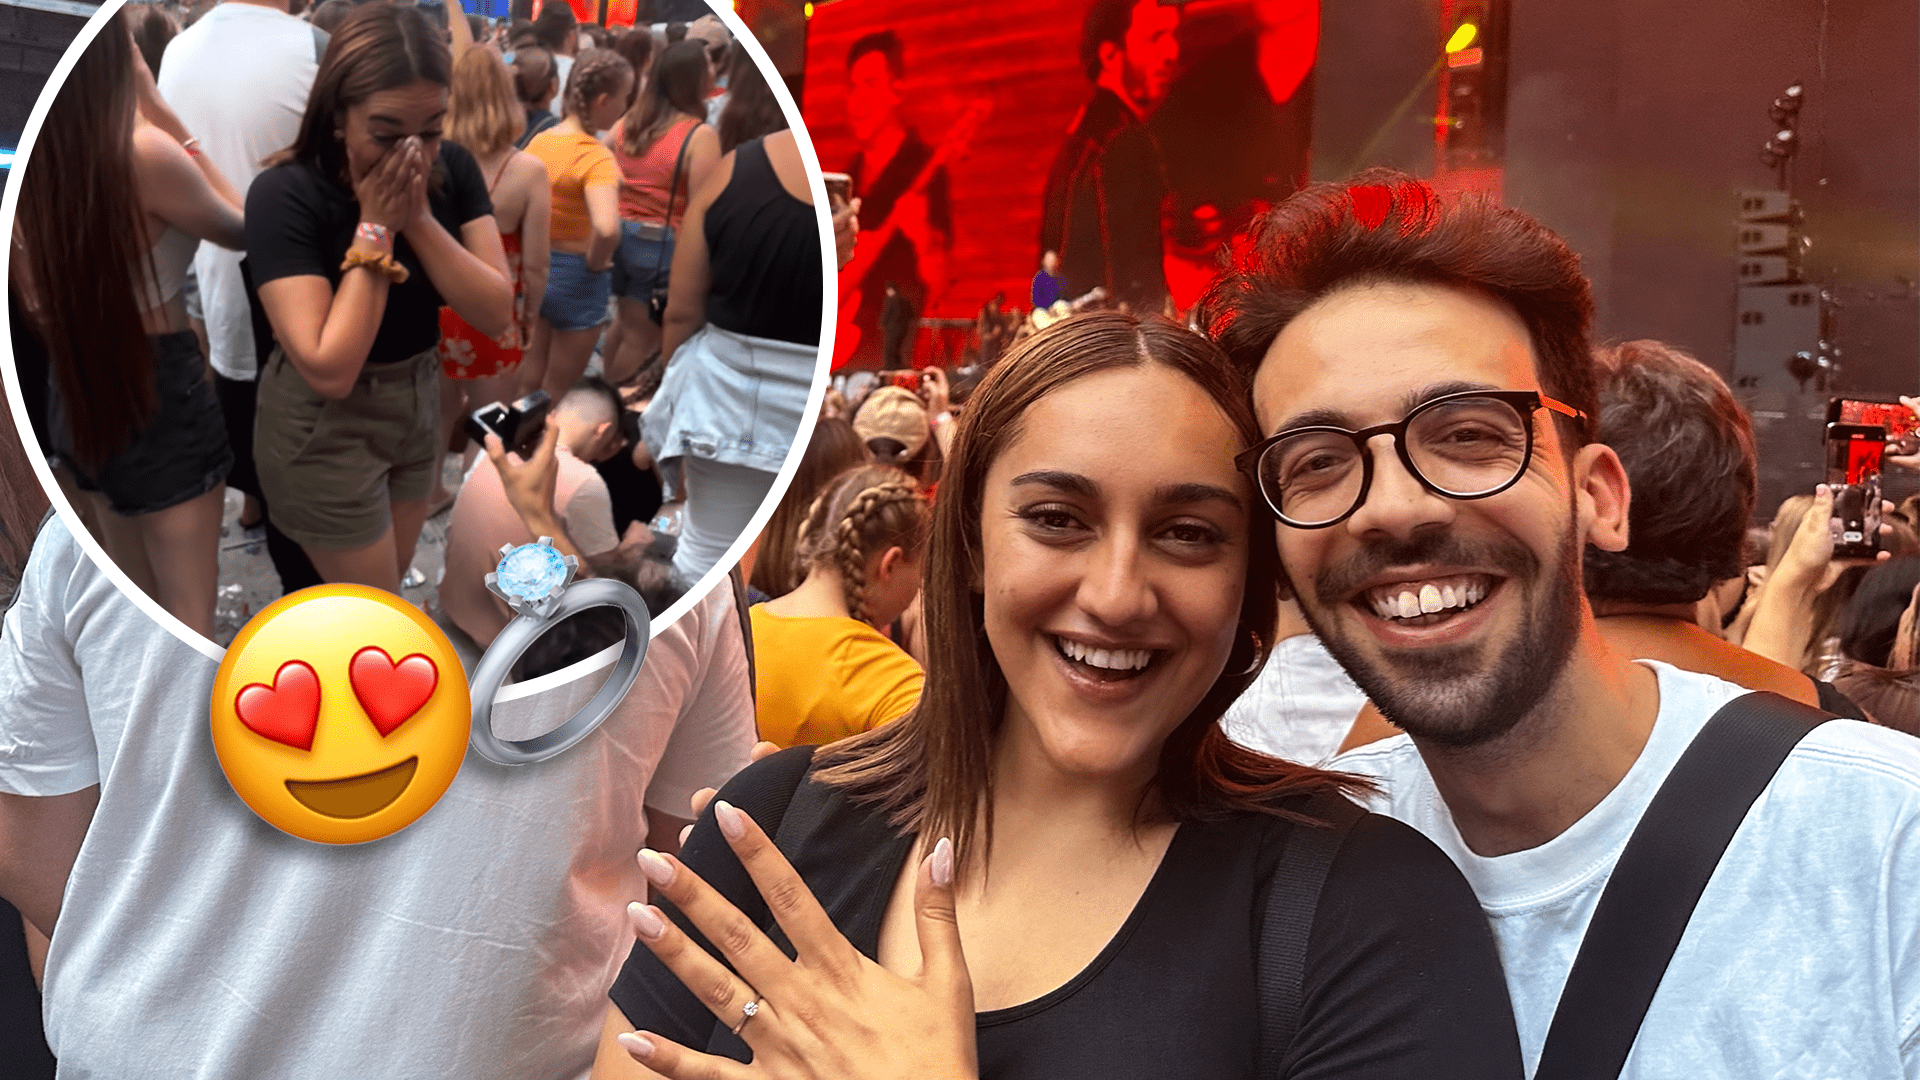 Daniel and Ylenia got engaged in london